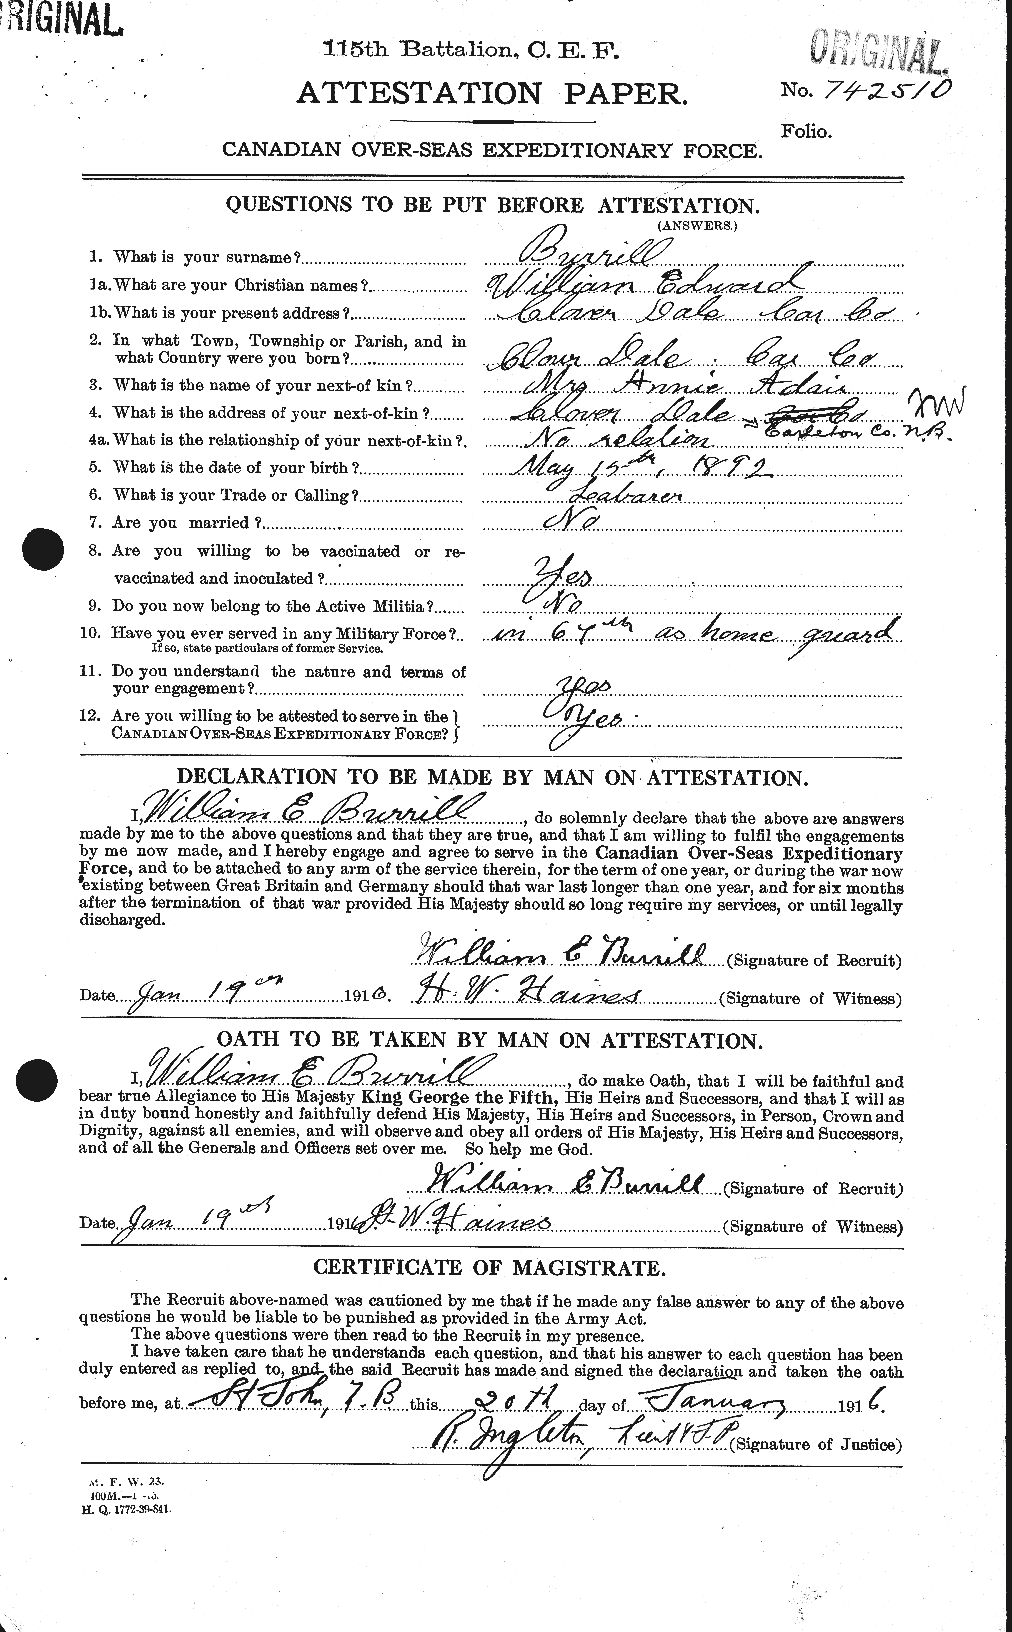 Personnel Records of the First World War - CEF 274683a